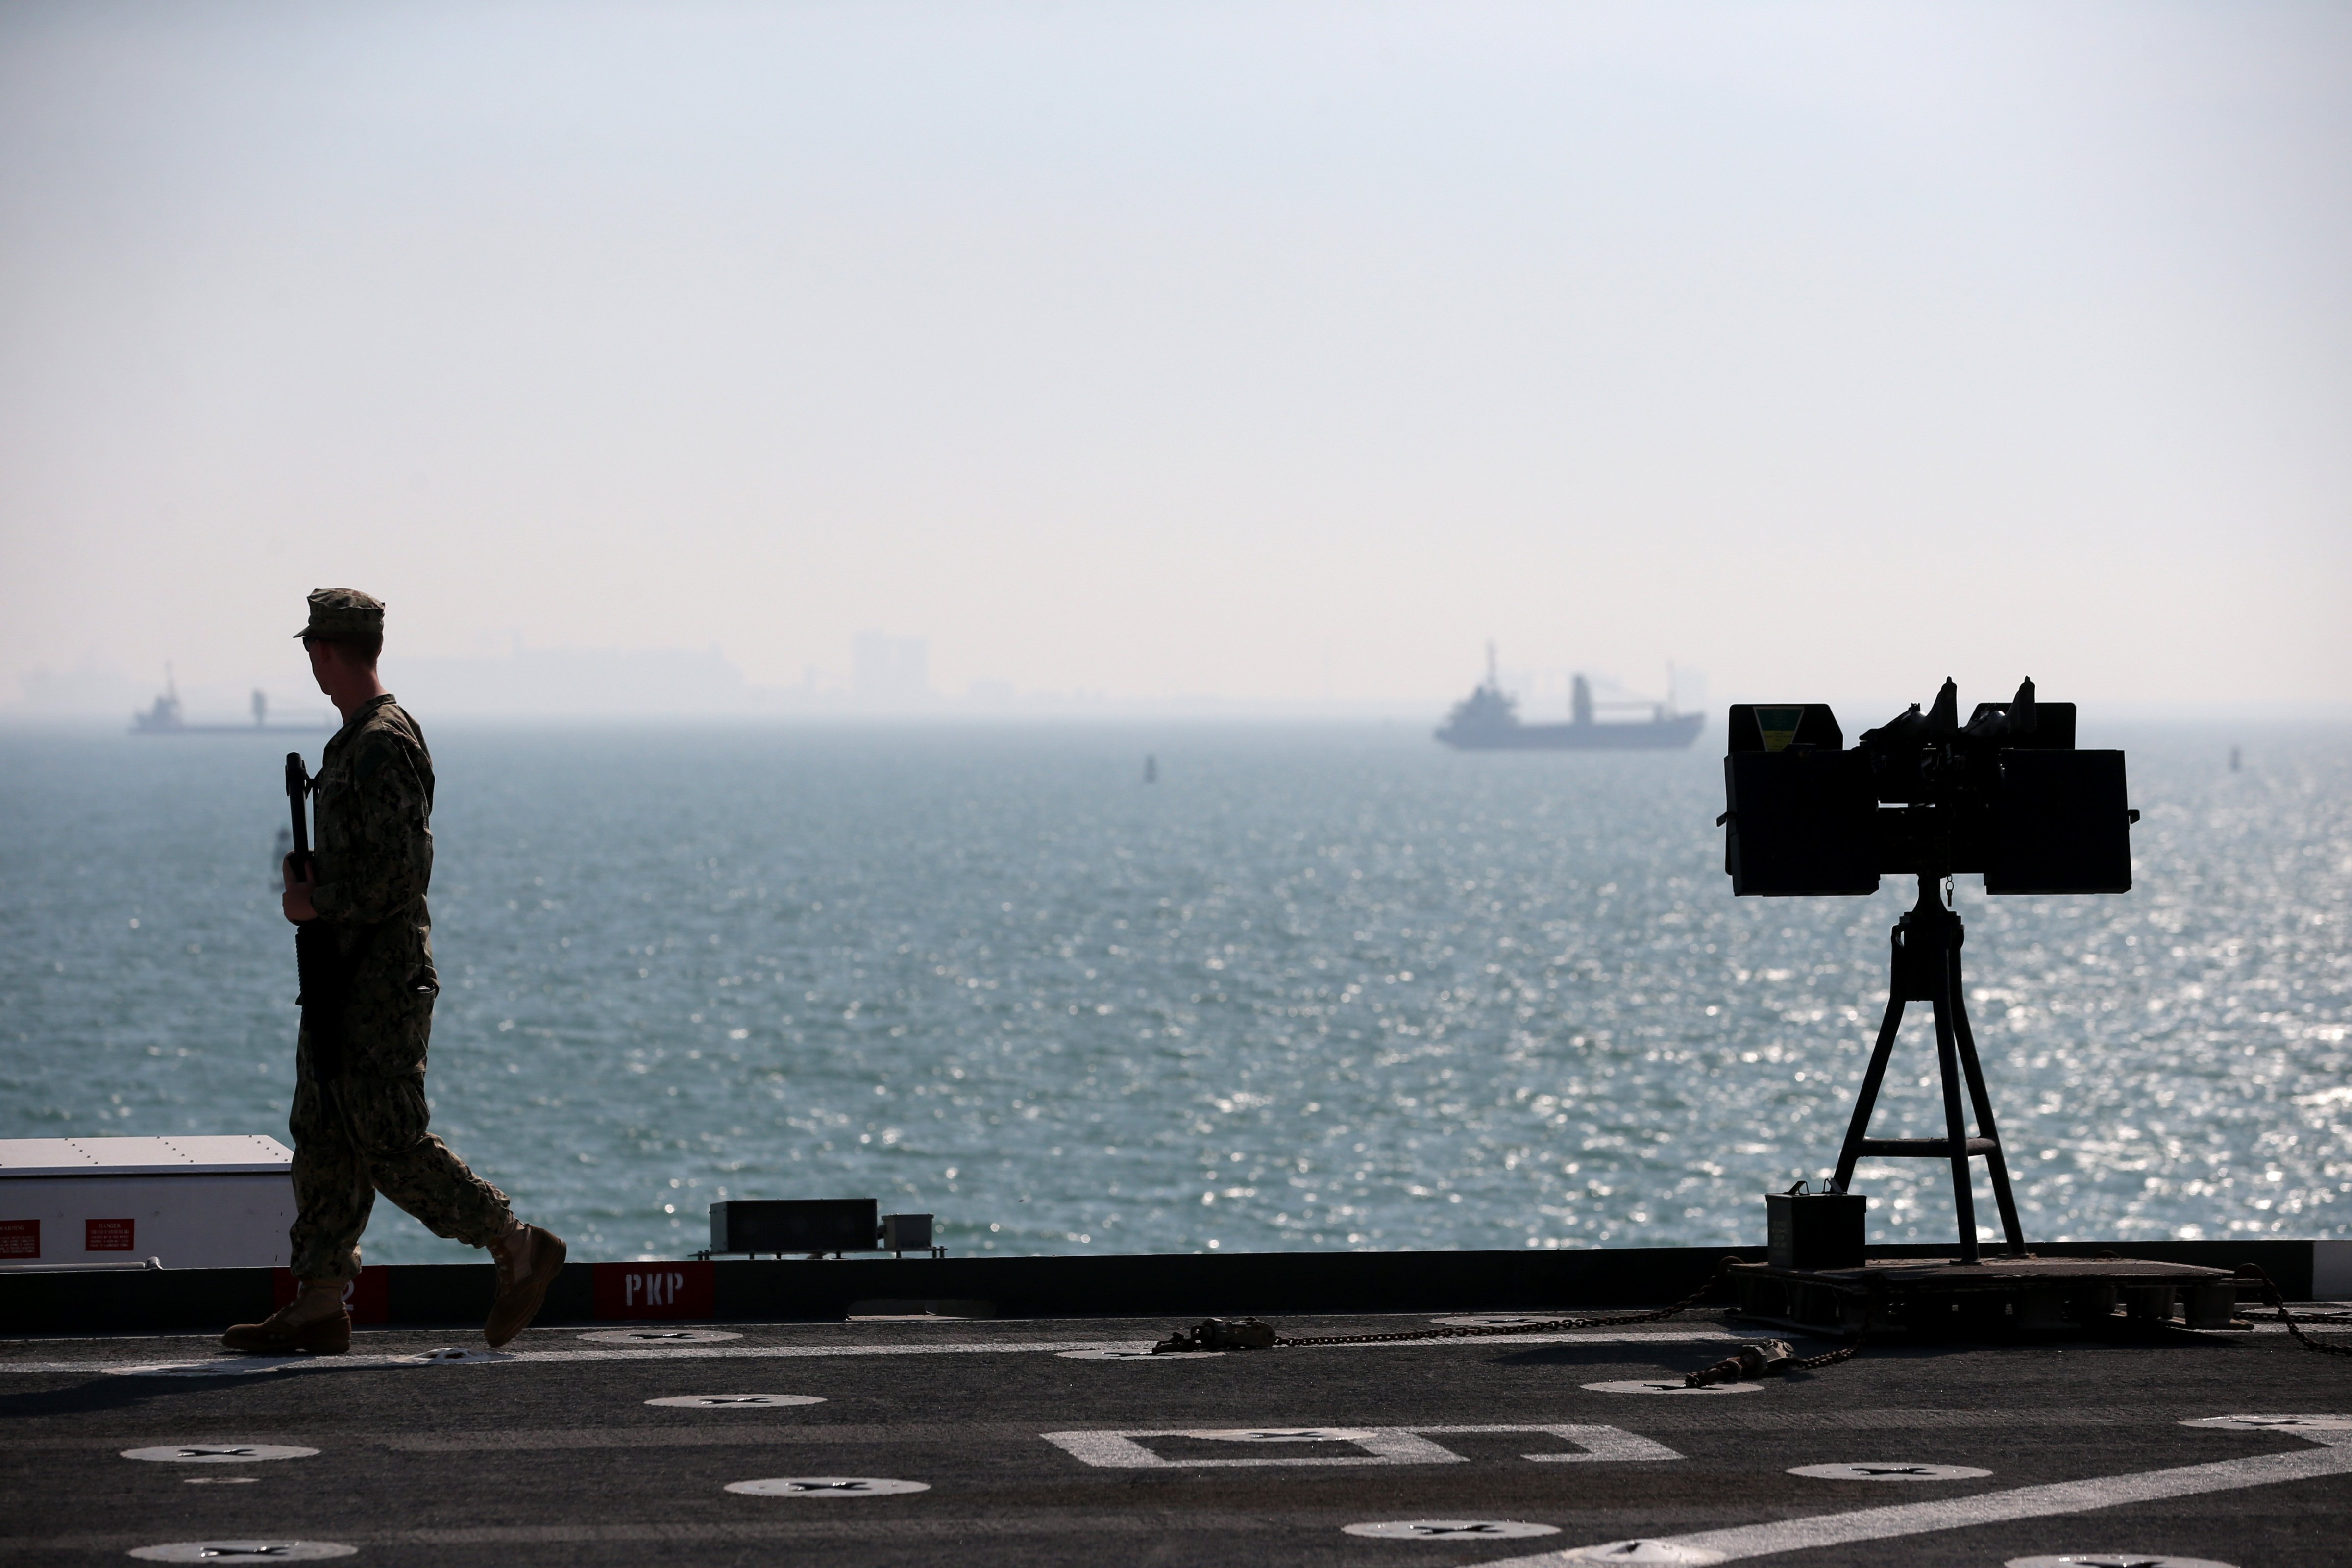 A Military guard patrols the deck of the USS Ponce where US Secretary of State Chuck Hagel was touring, on Dec. 6, 2013 in Manama, Bahrain. (Mark Wilson—Getty Images)